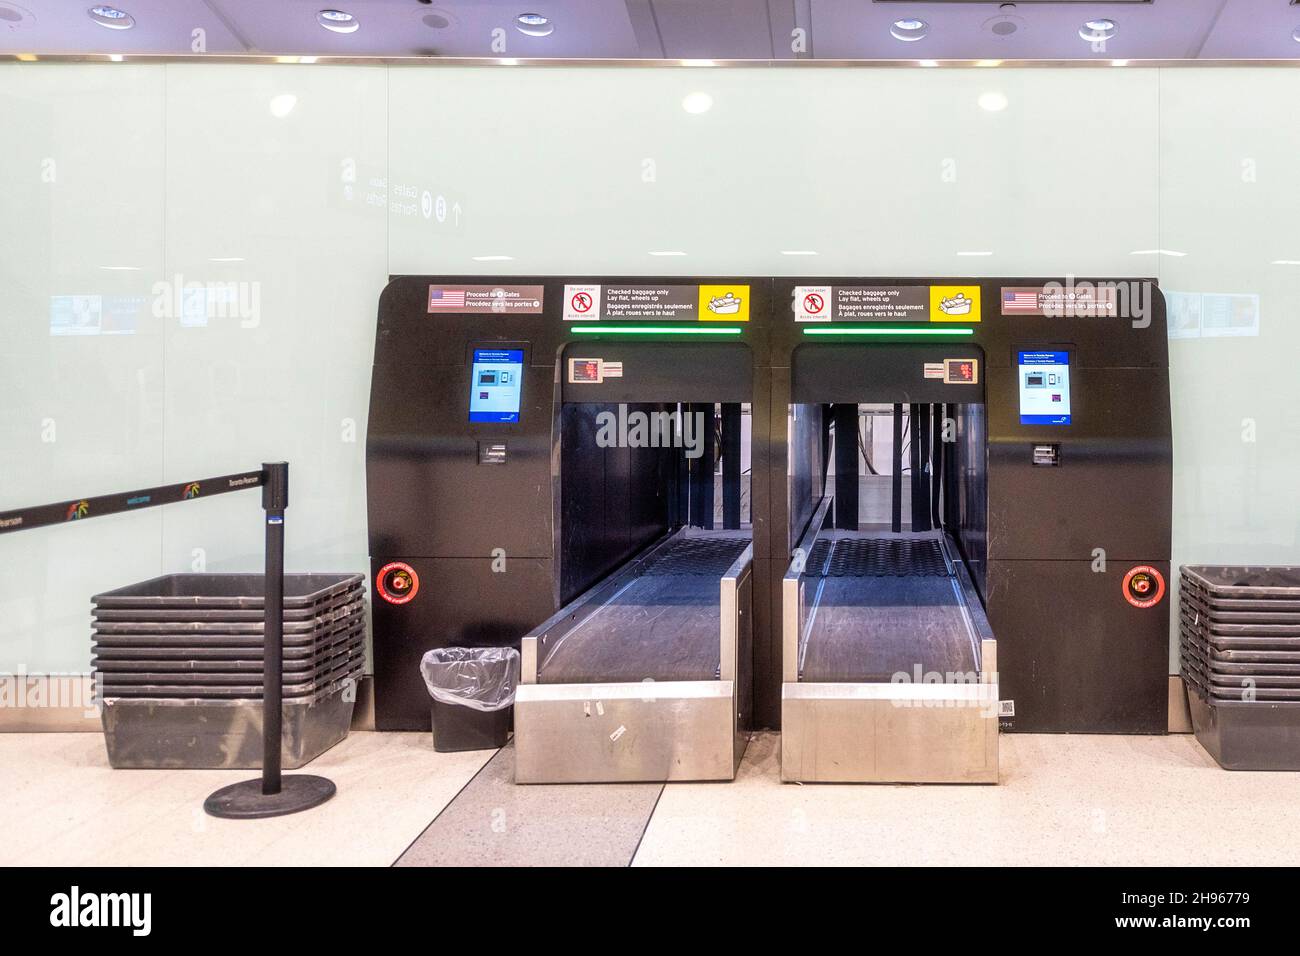 No people at a self luggage dispatch machine at Terminal 3 at Pearson International Airport. Dec. 4, 2021 Stock Photo